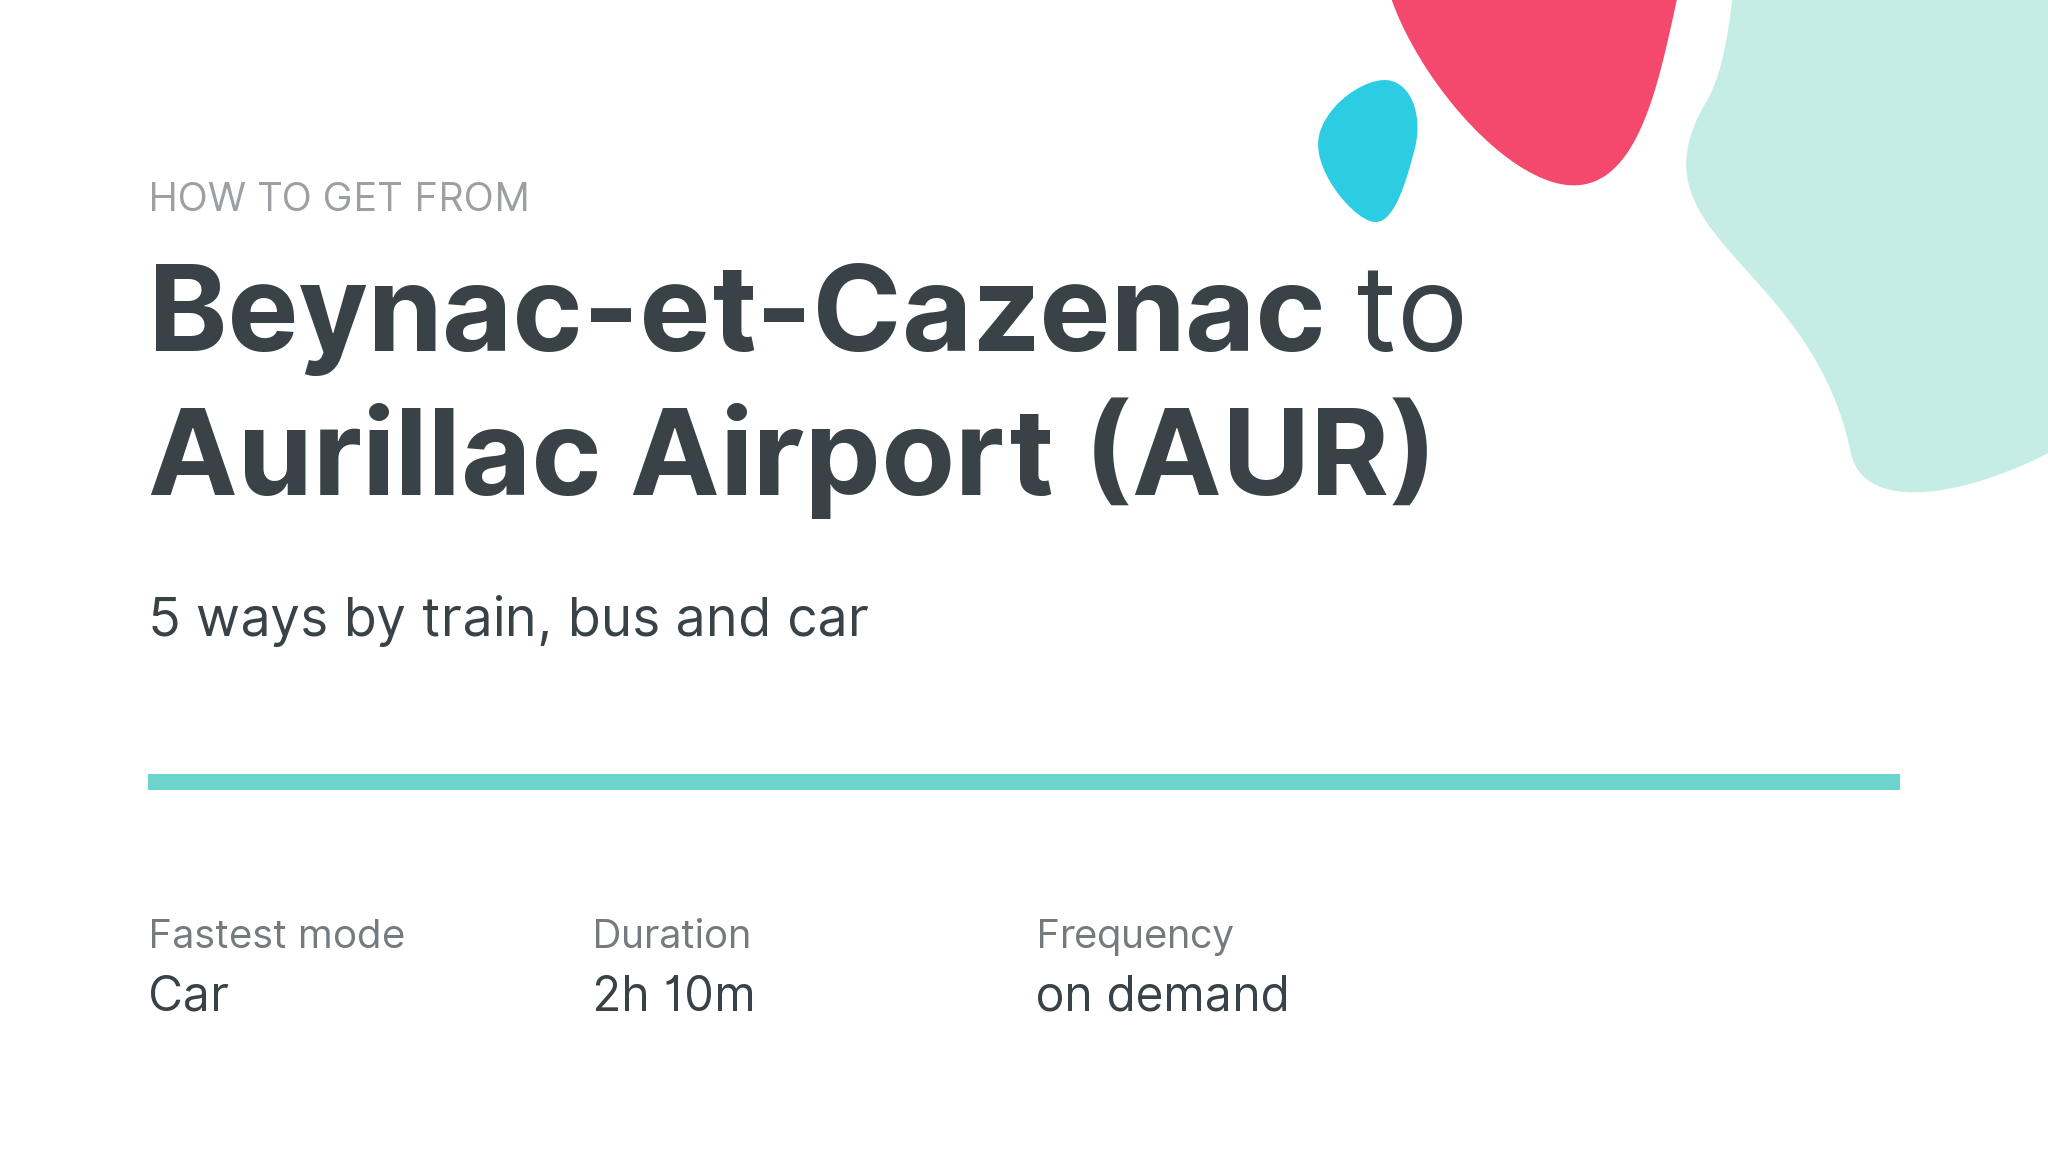 How do I get from Beynac-et-Cazenac to Aurillac Airport (AUR)